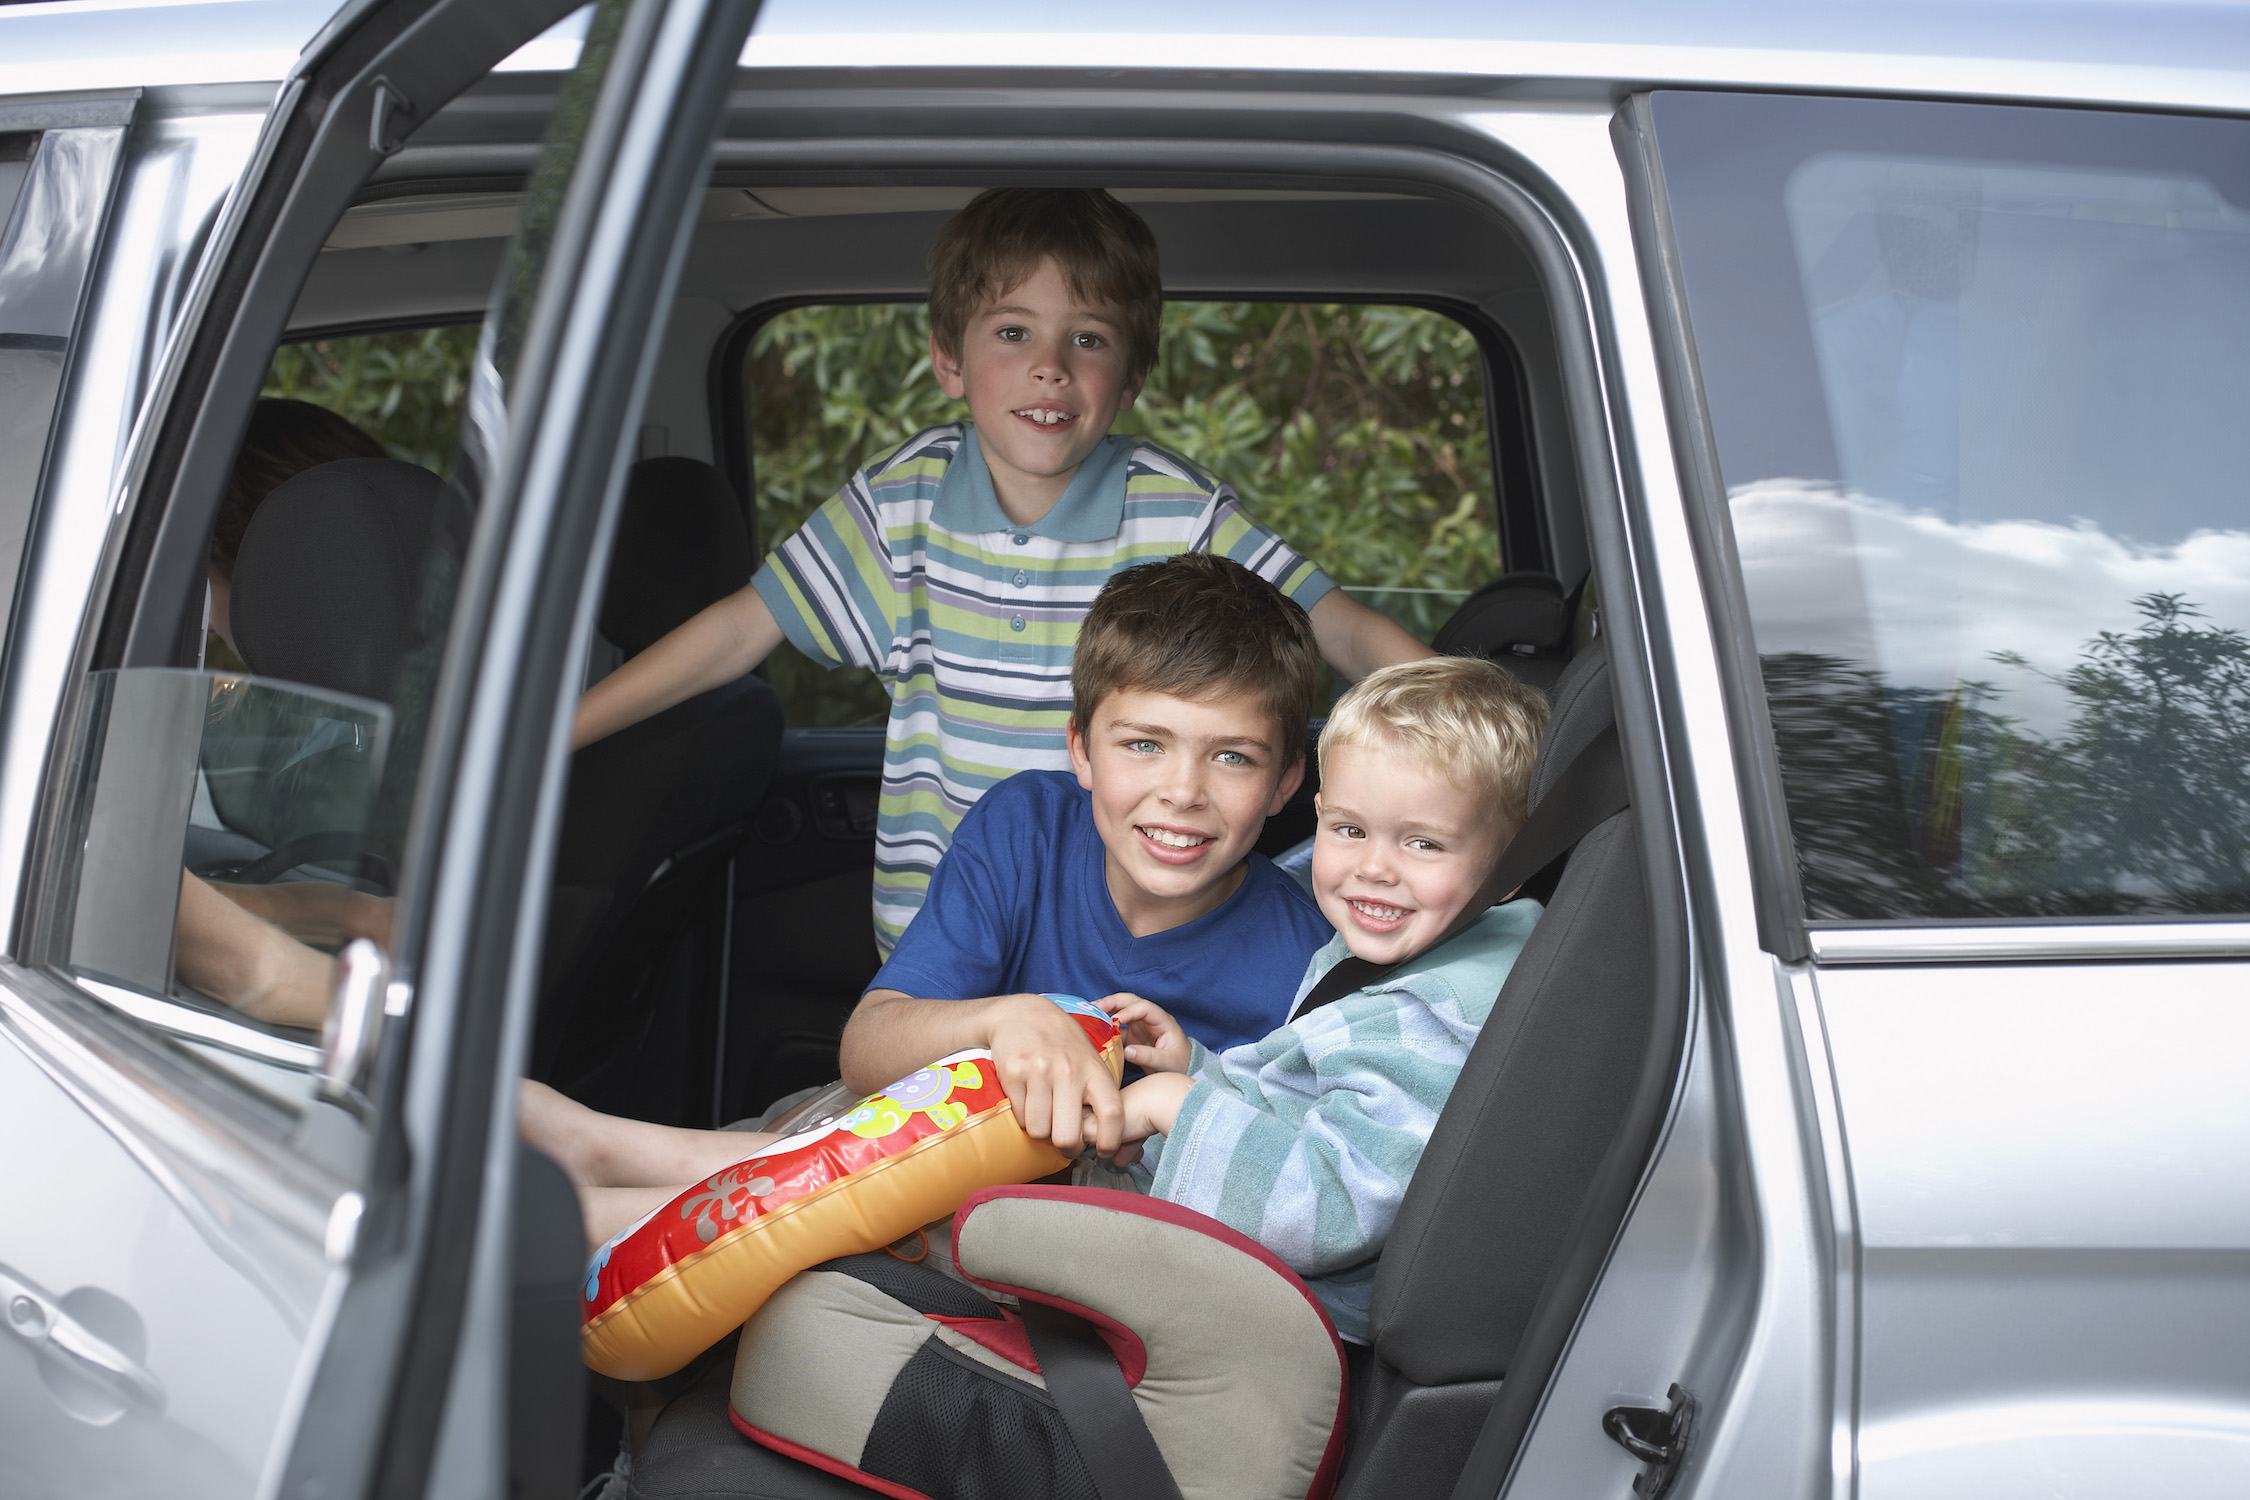 Car Safety Tips for Kids – 8 Ways to Keep Your Kids Safe in the Car